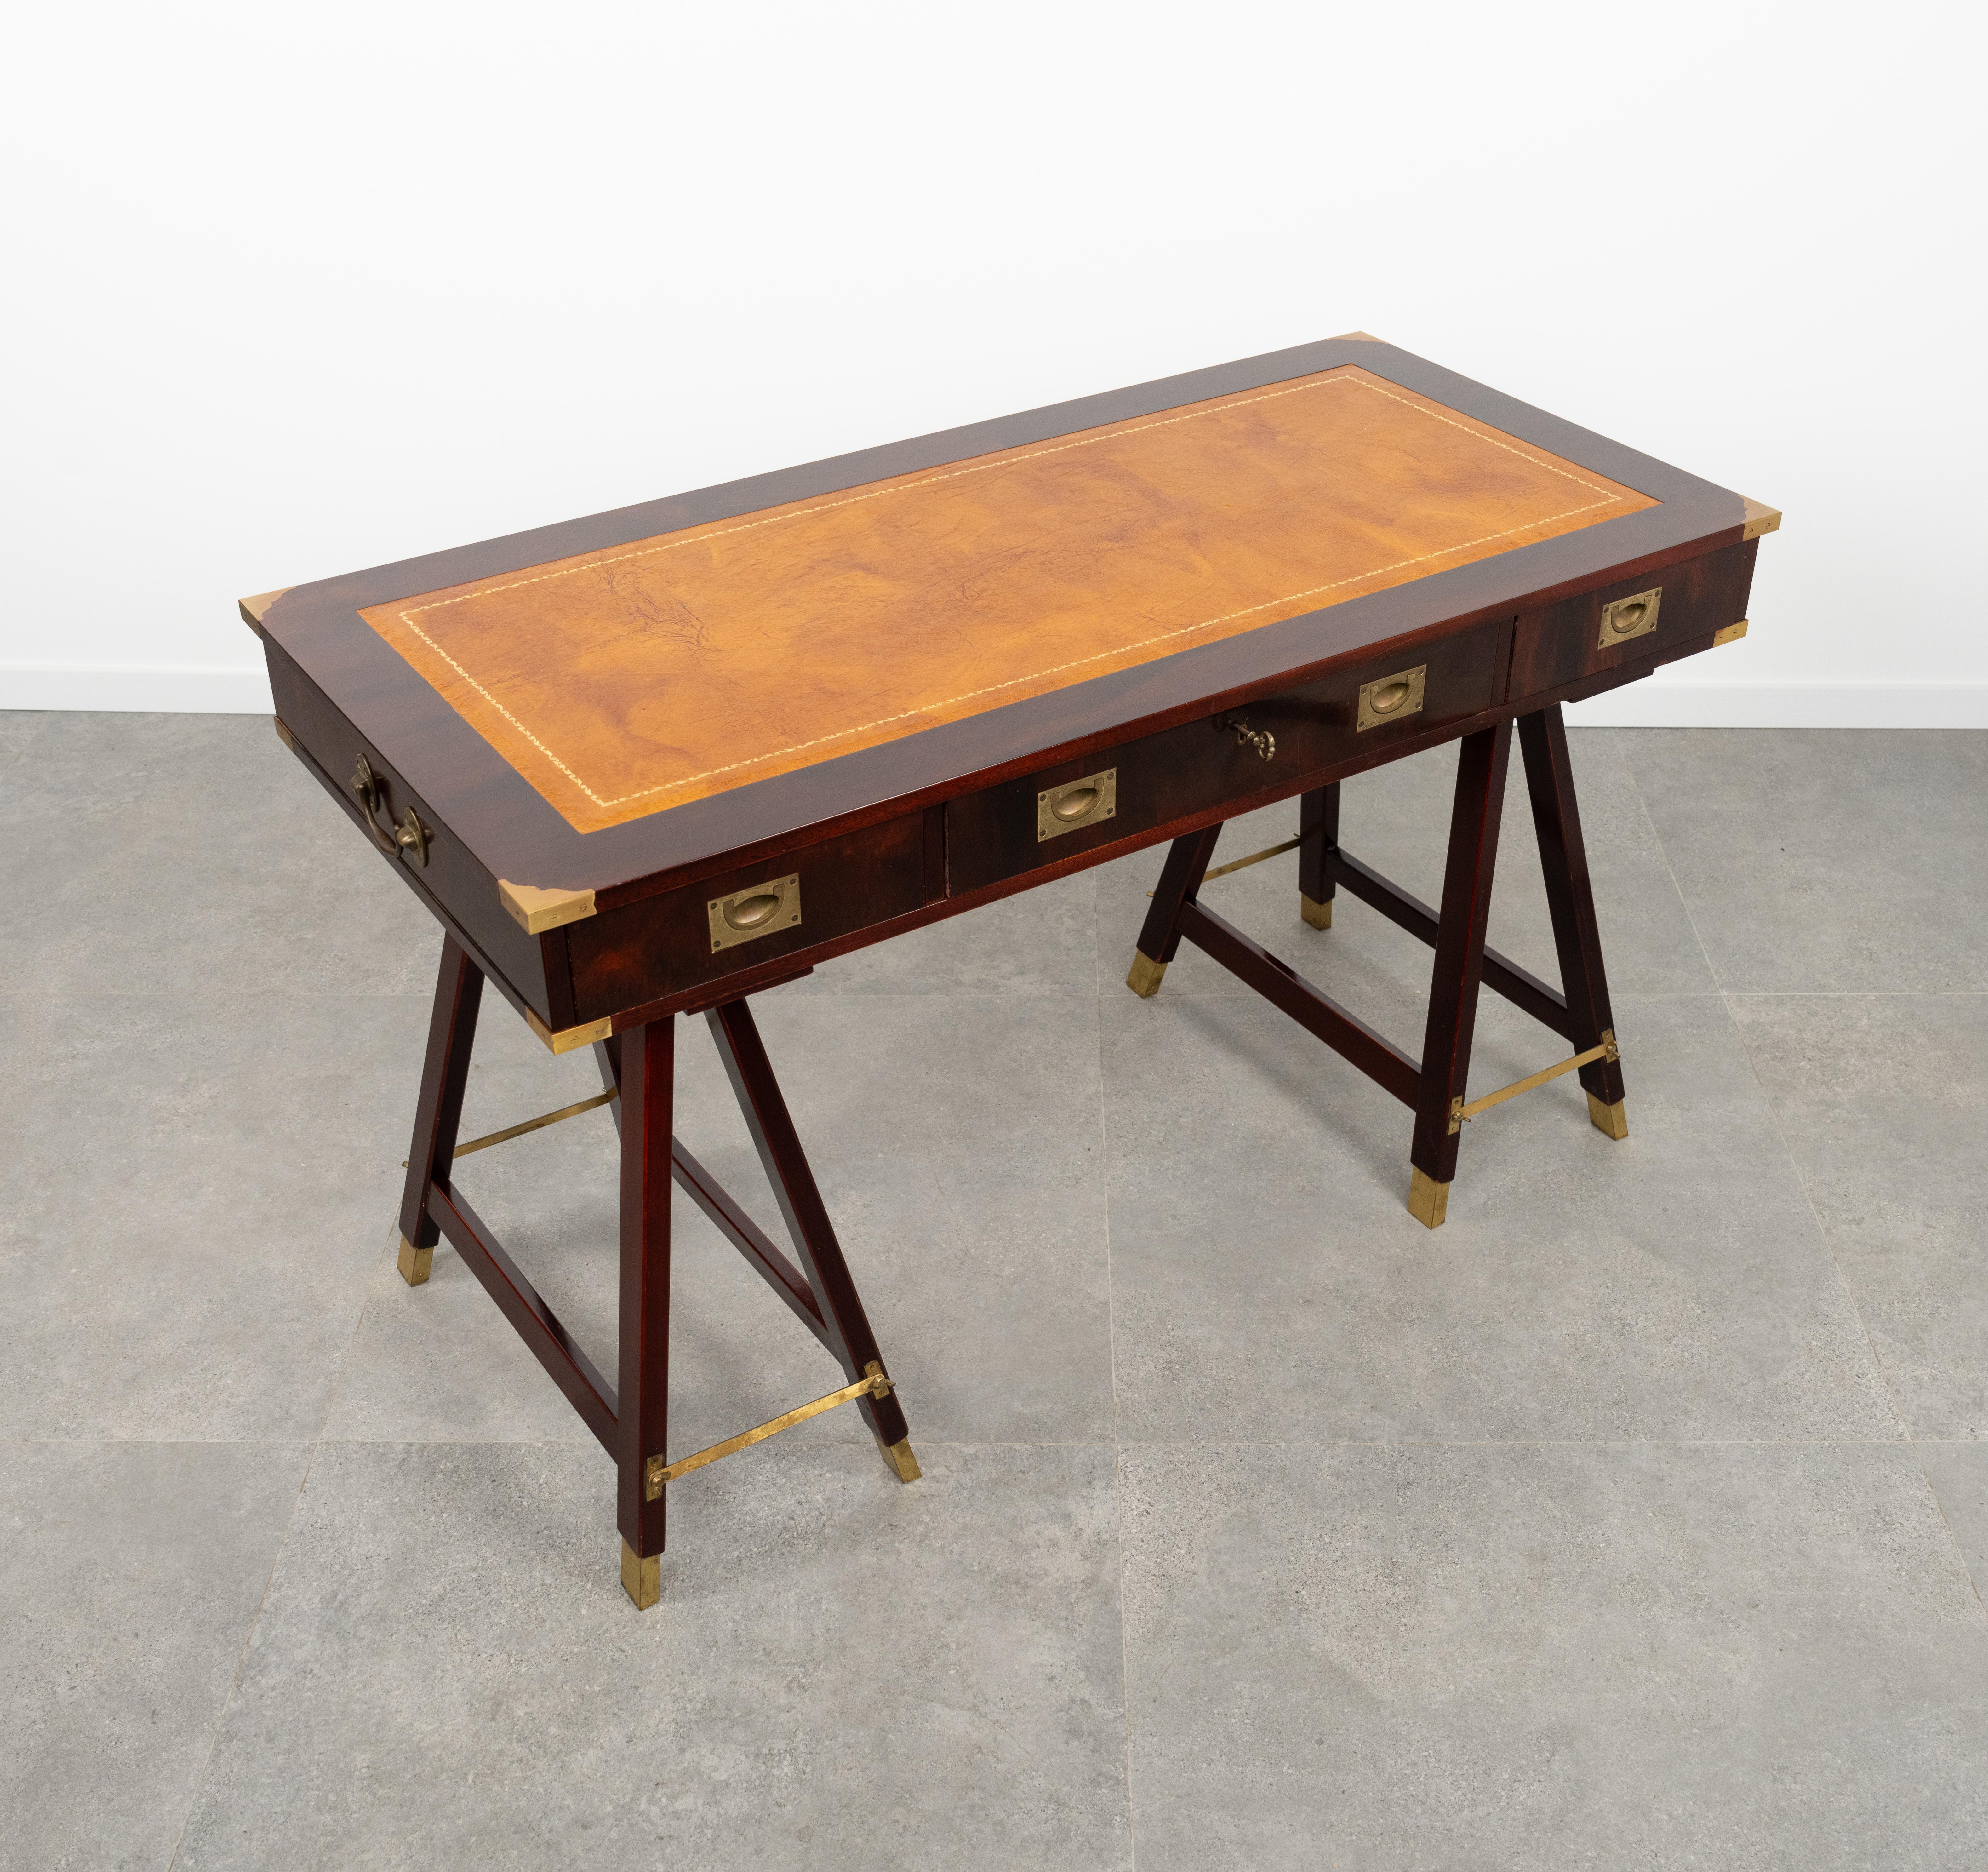 Mid-20th Century Military Campaign Style Desk Table in Wood, Brass and Leather, Italy 1960s For Sale